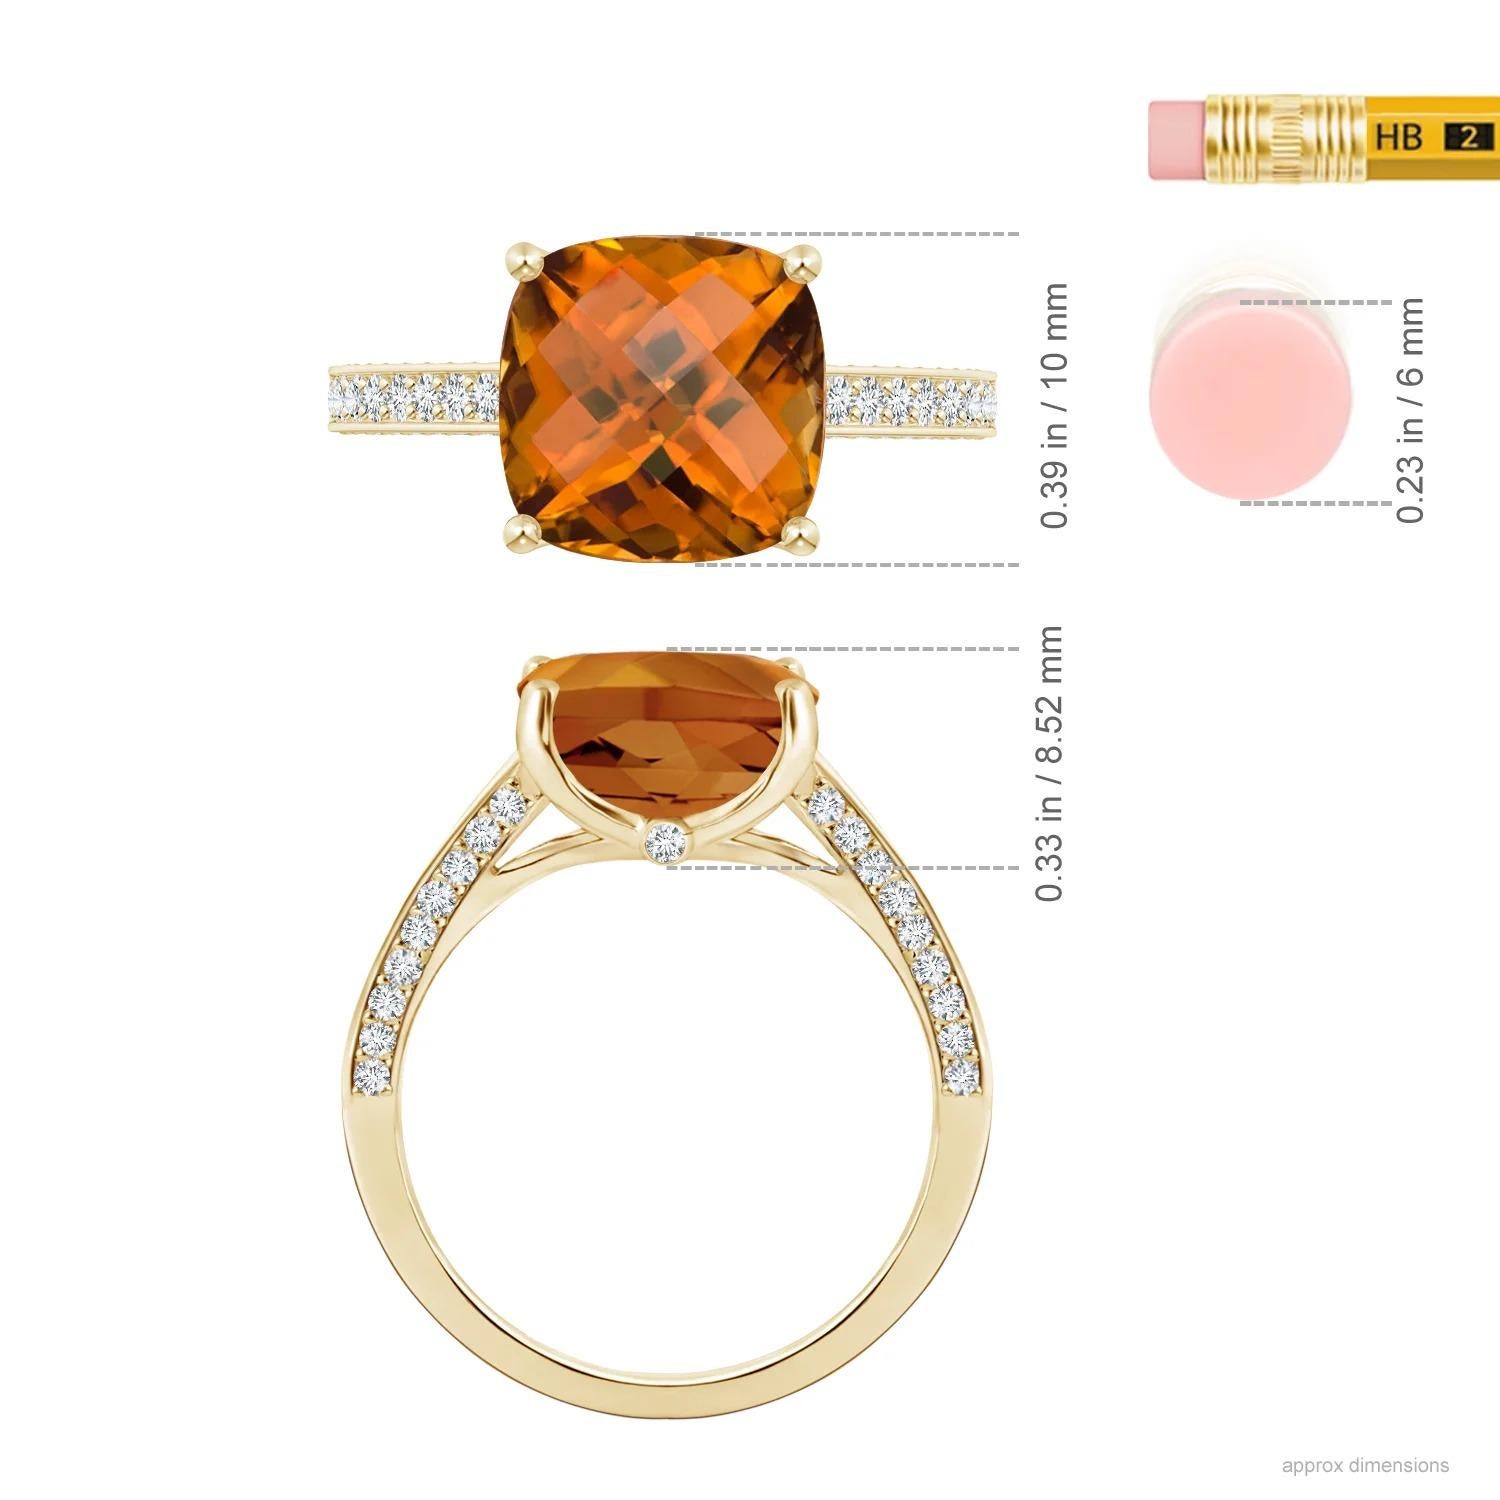 For Sale:  GIA Certified Natural Cushion Orange Zircon Cocktail Ring in Yellow Gold 5